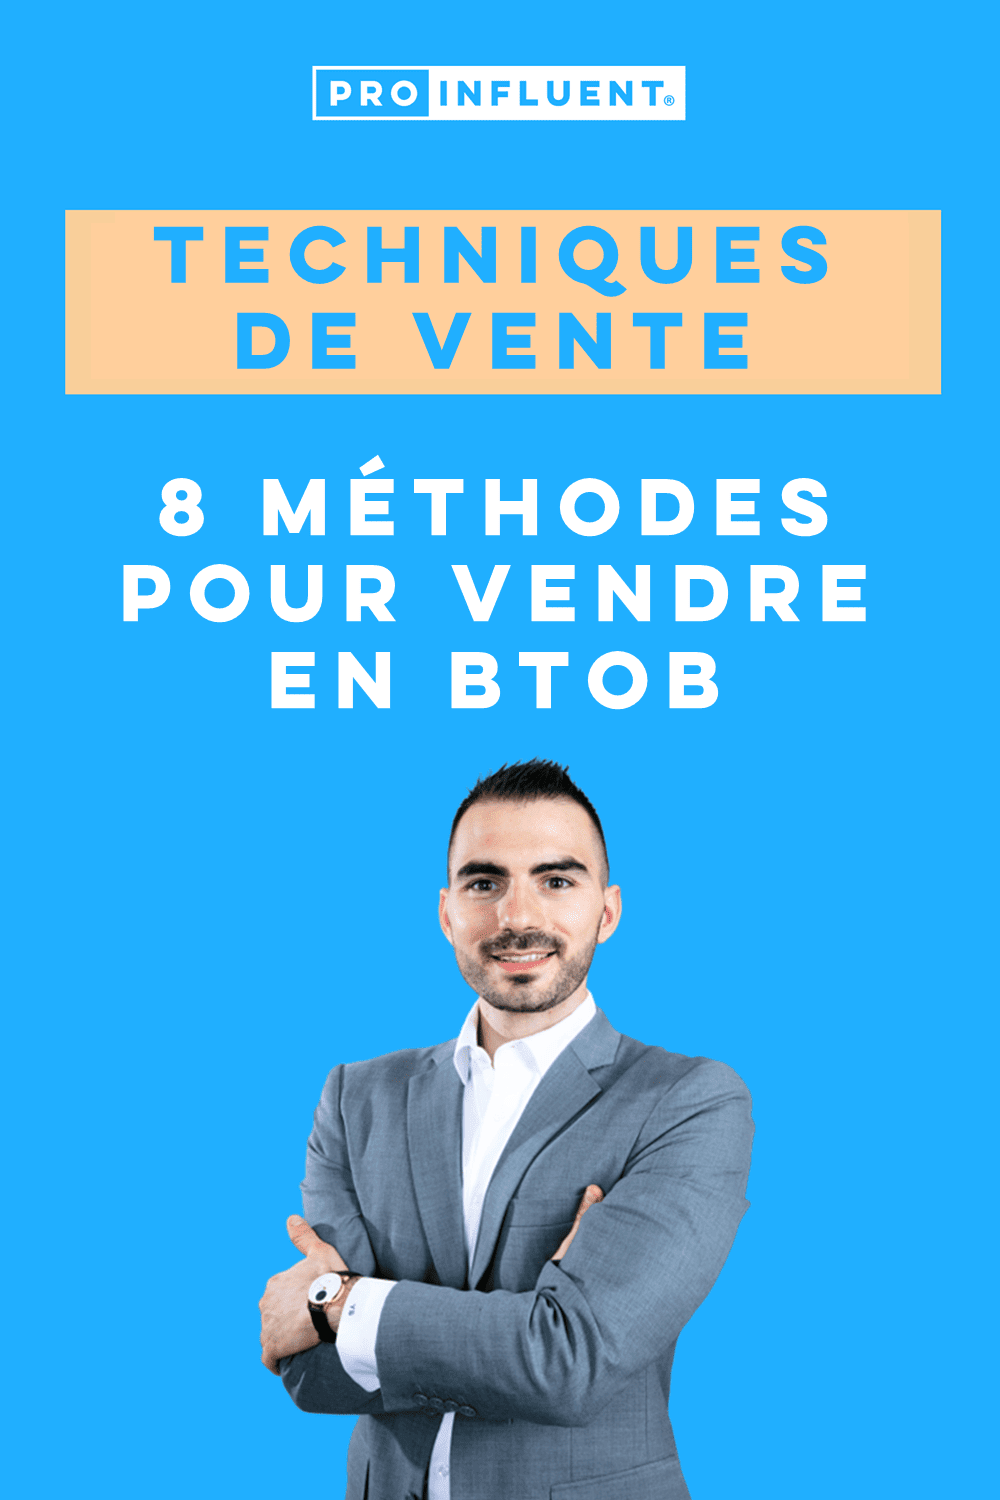 Sales techniques: 8 methods to sell in BtoB